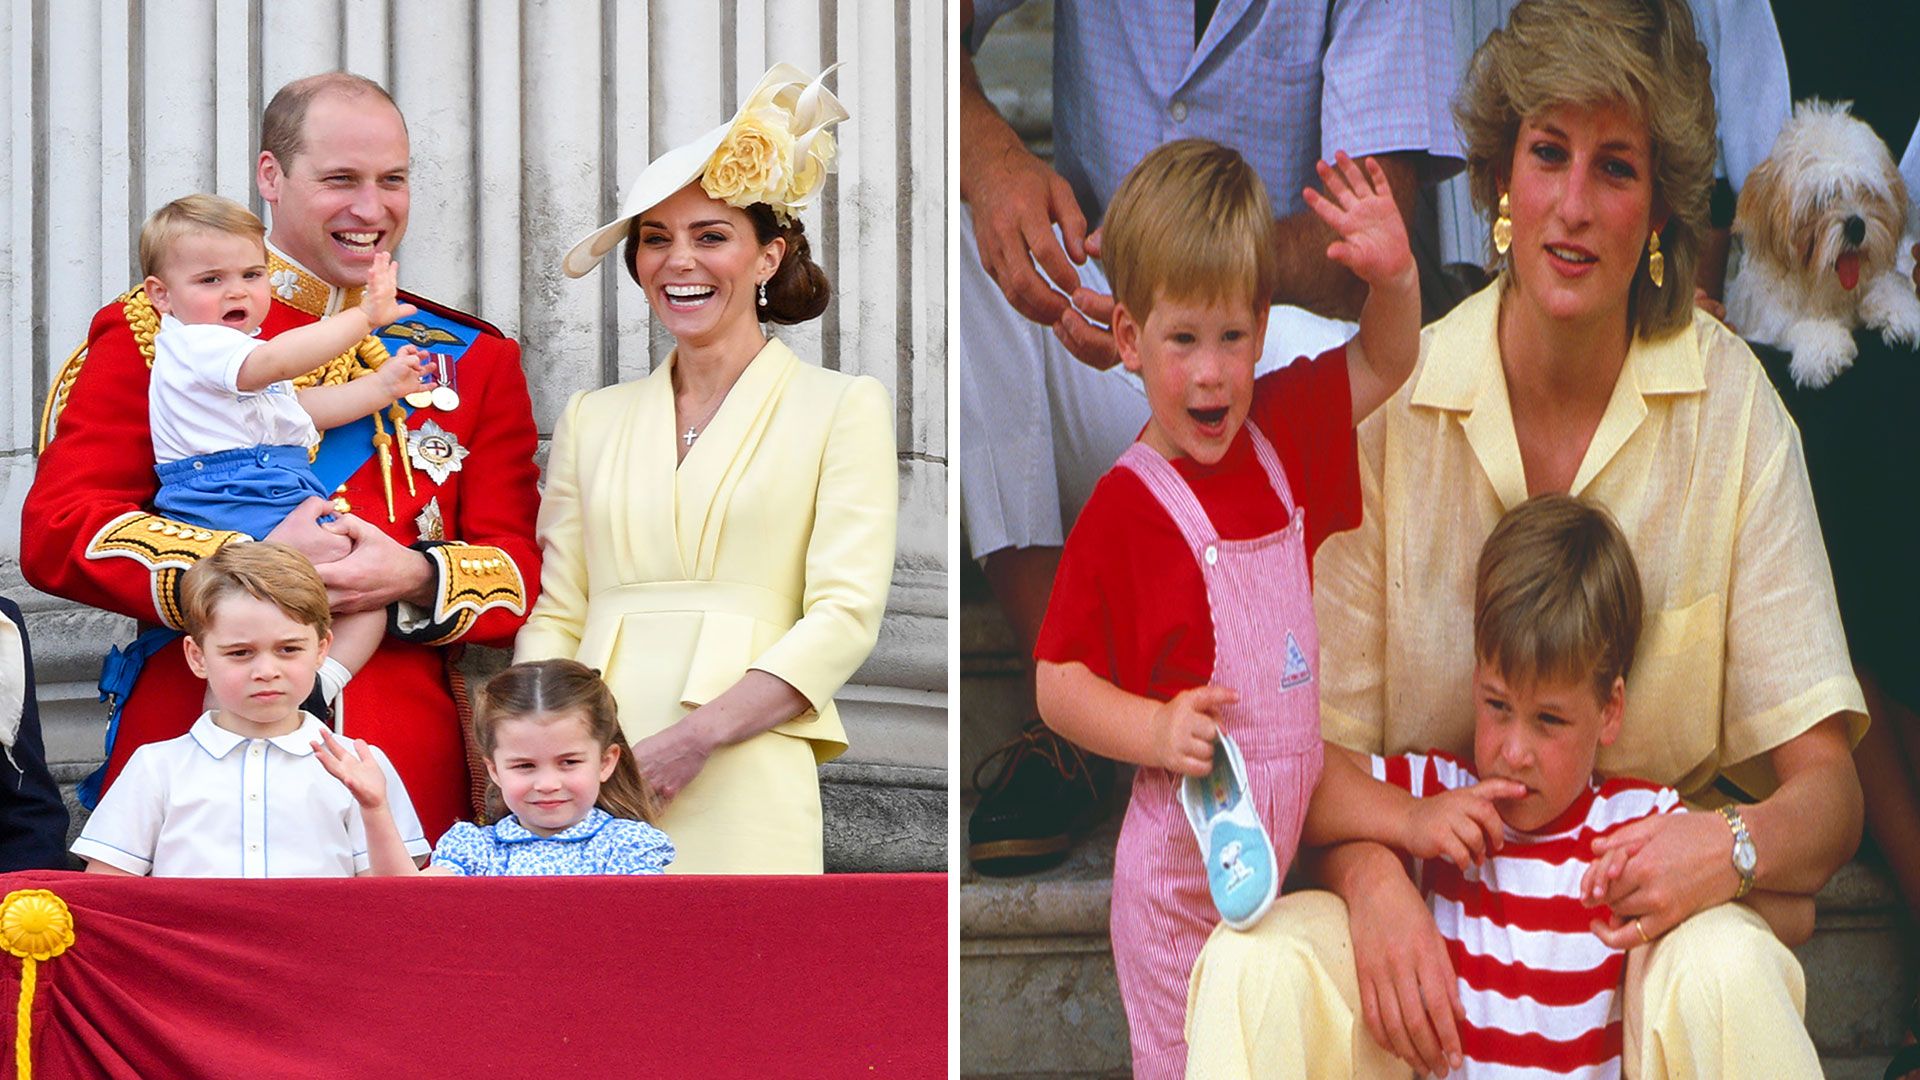 Princess Kate channels Princess Diana's parenting style with George, Charlotte and Louis